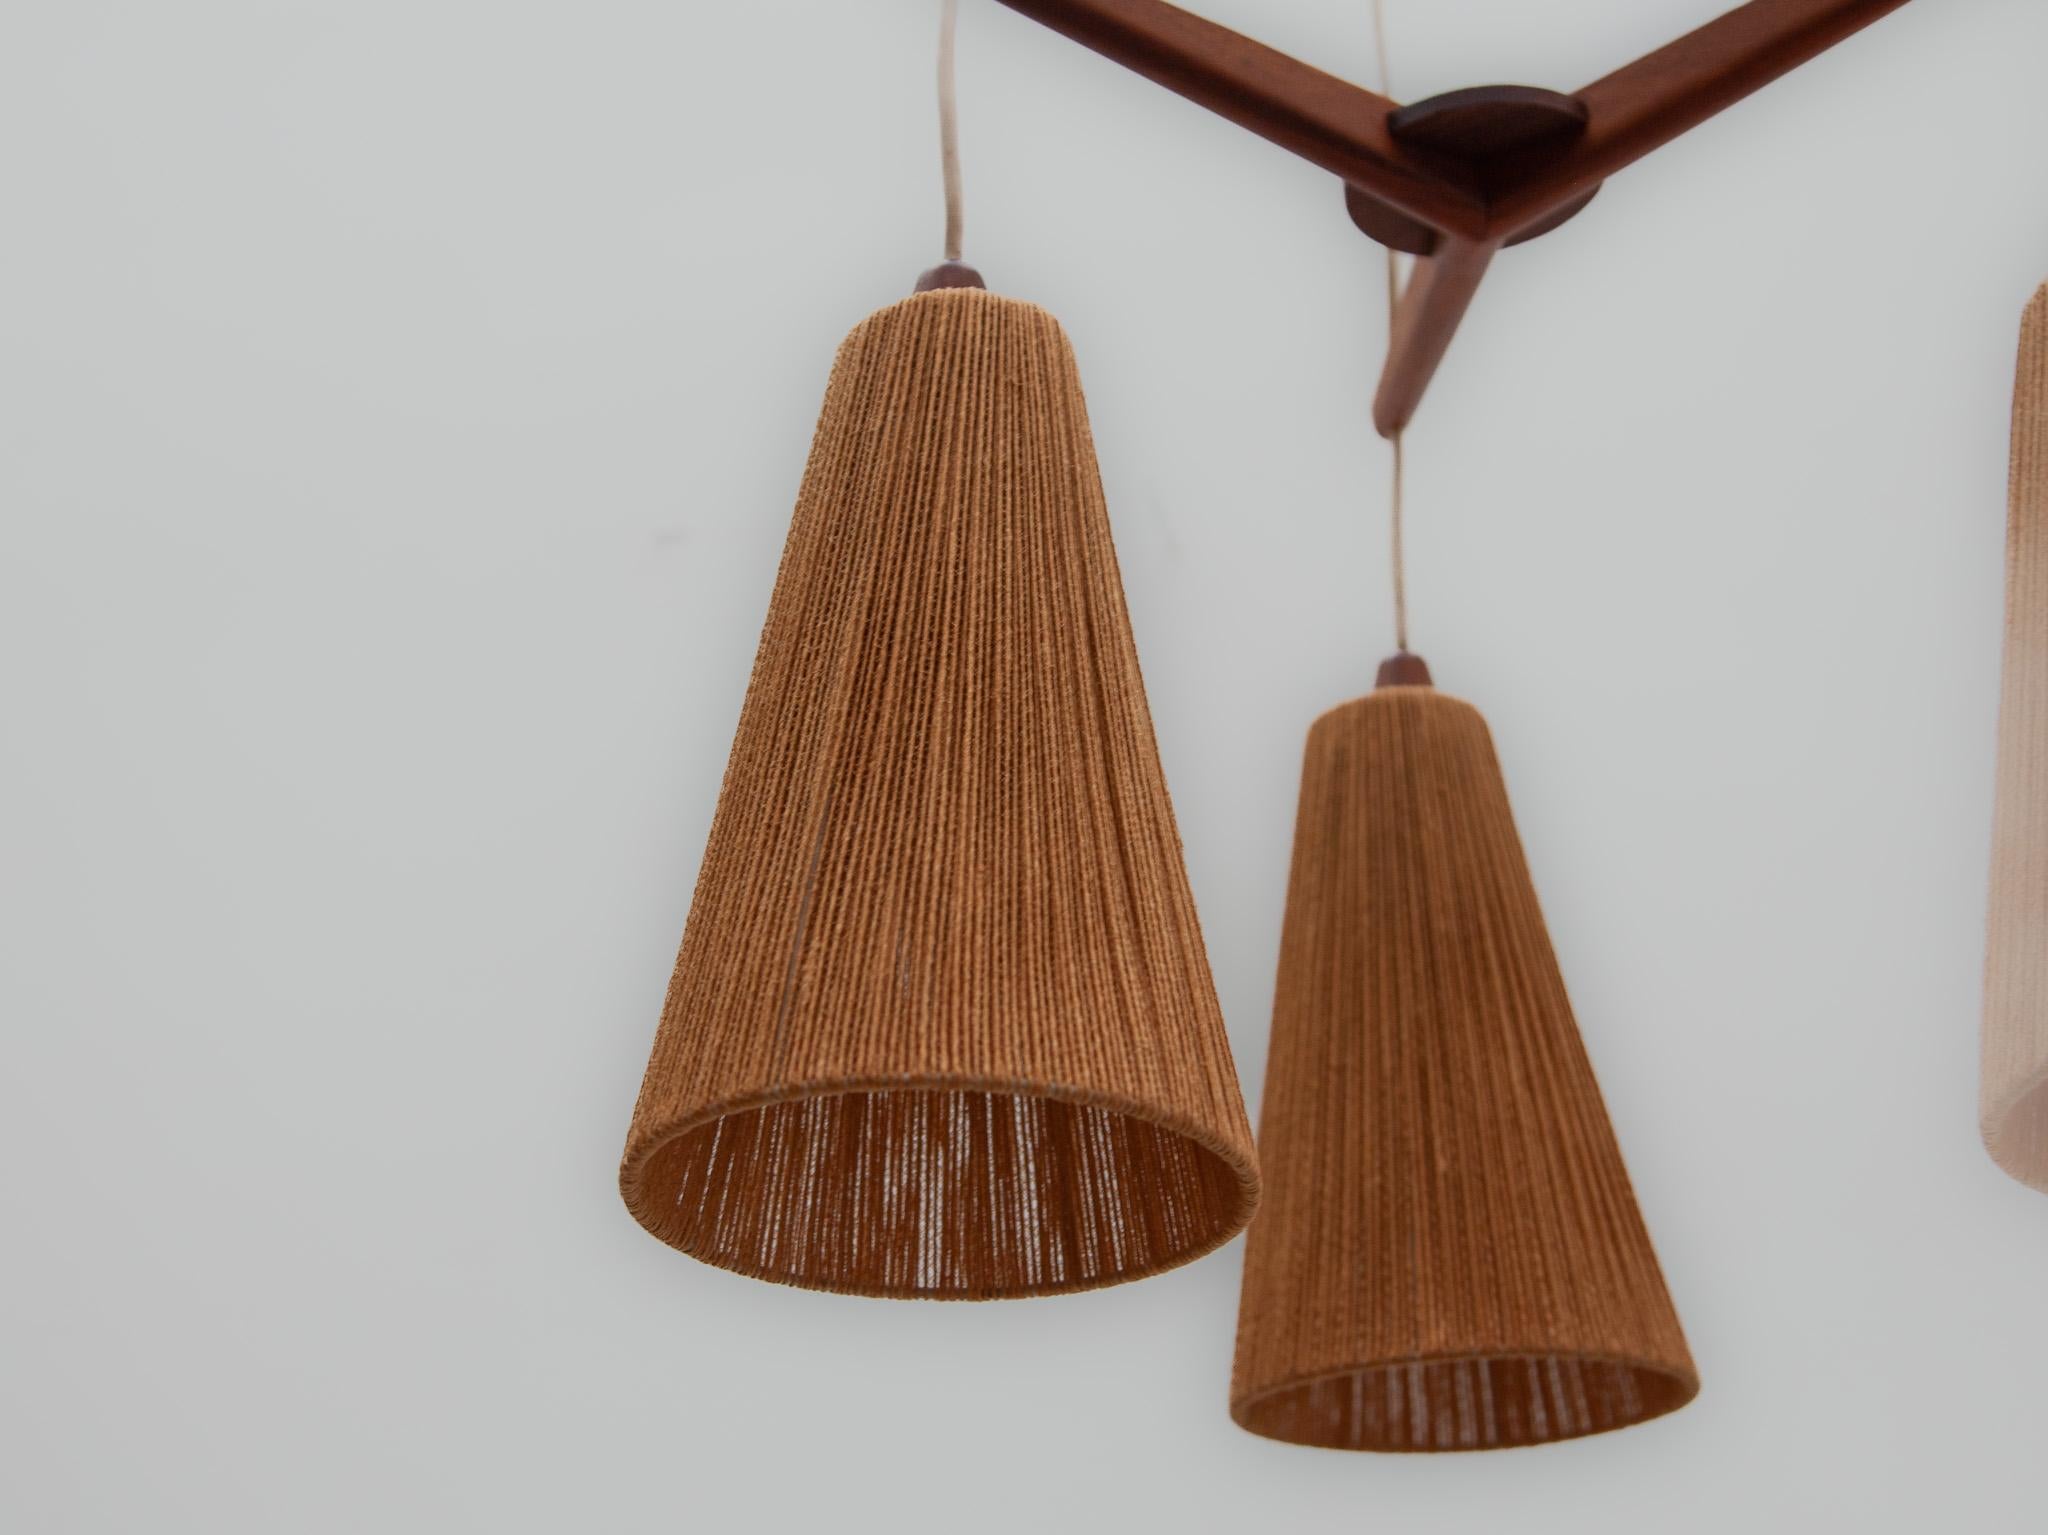 Teak and Jute Cord Pendant Cascade Lamp by Temde, Germany, 1960s For Sale 3